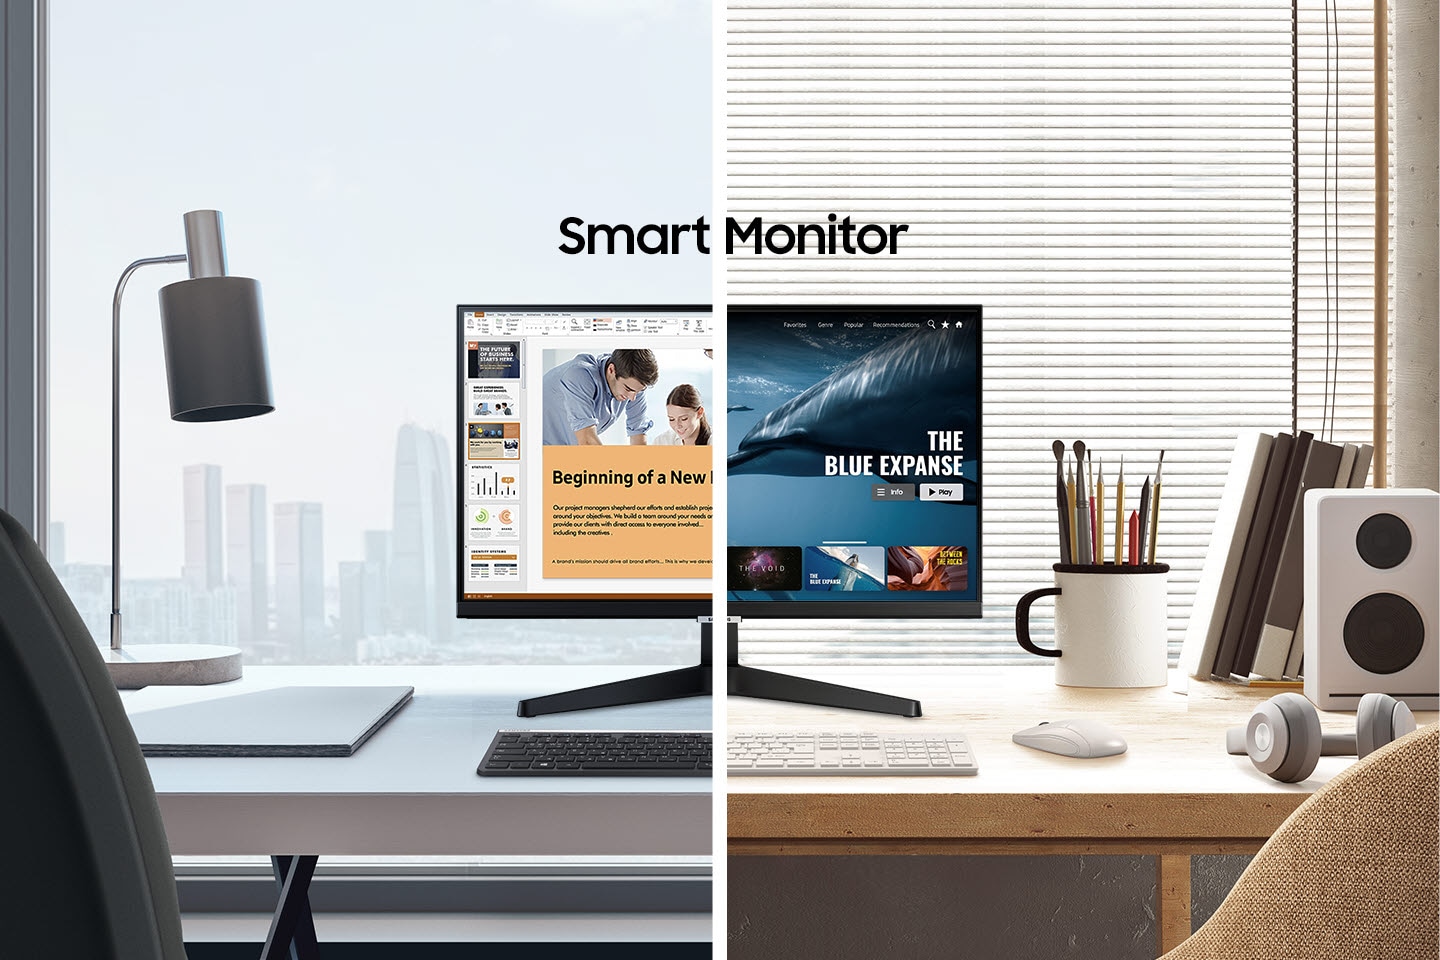 Below the title Smart Monitor a vertical line divides two different images of a monitor. The line slides right to reveal an office desk with ppt on the monitor and the words Work without PC, and slides left to reveal a home desk with a movie playing on the monitor and the words Play simple & easy.